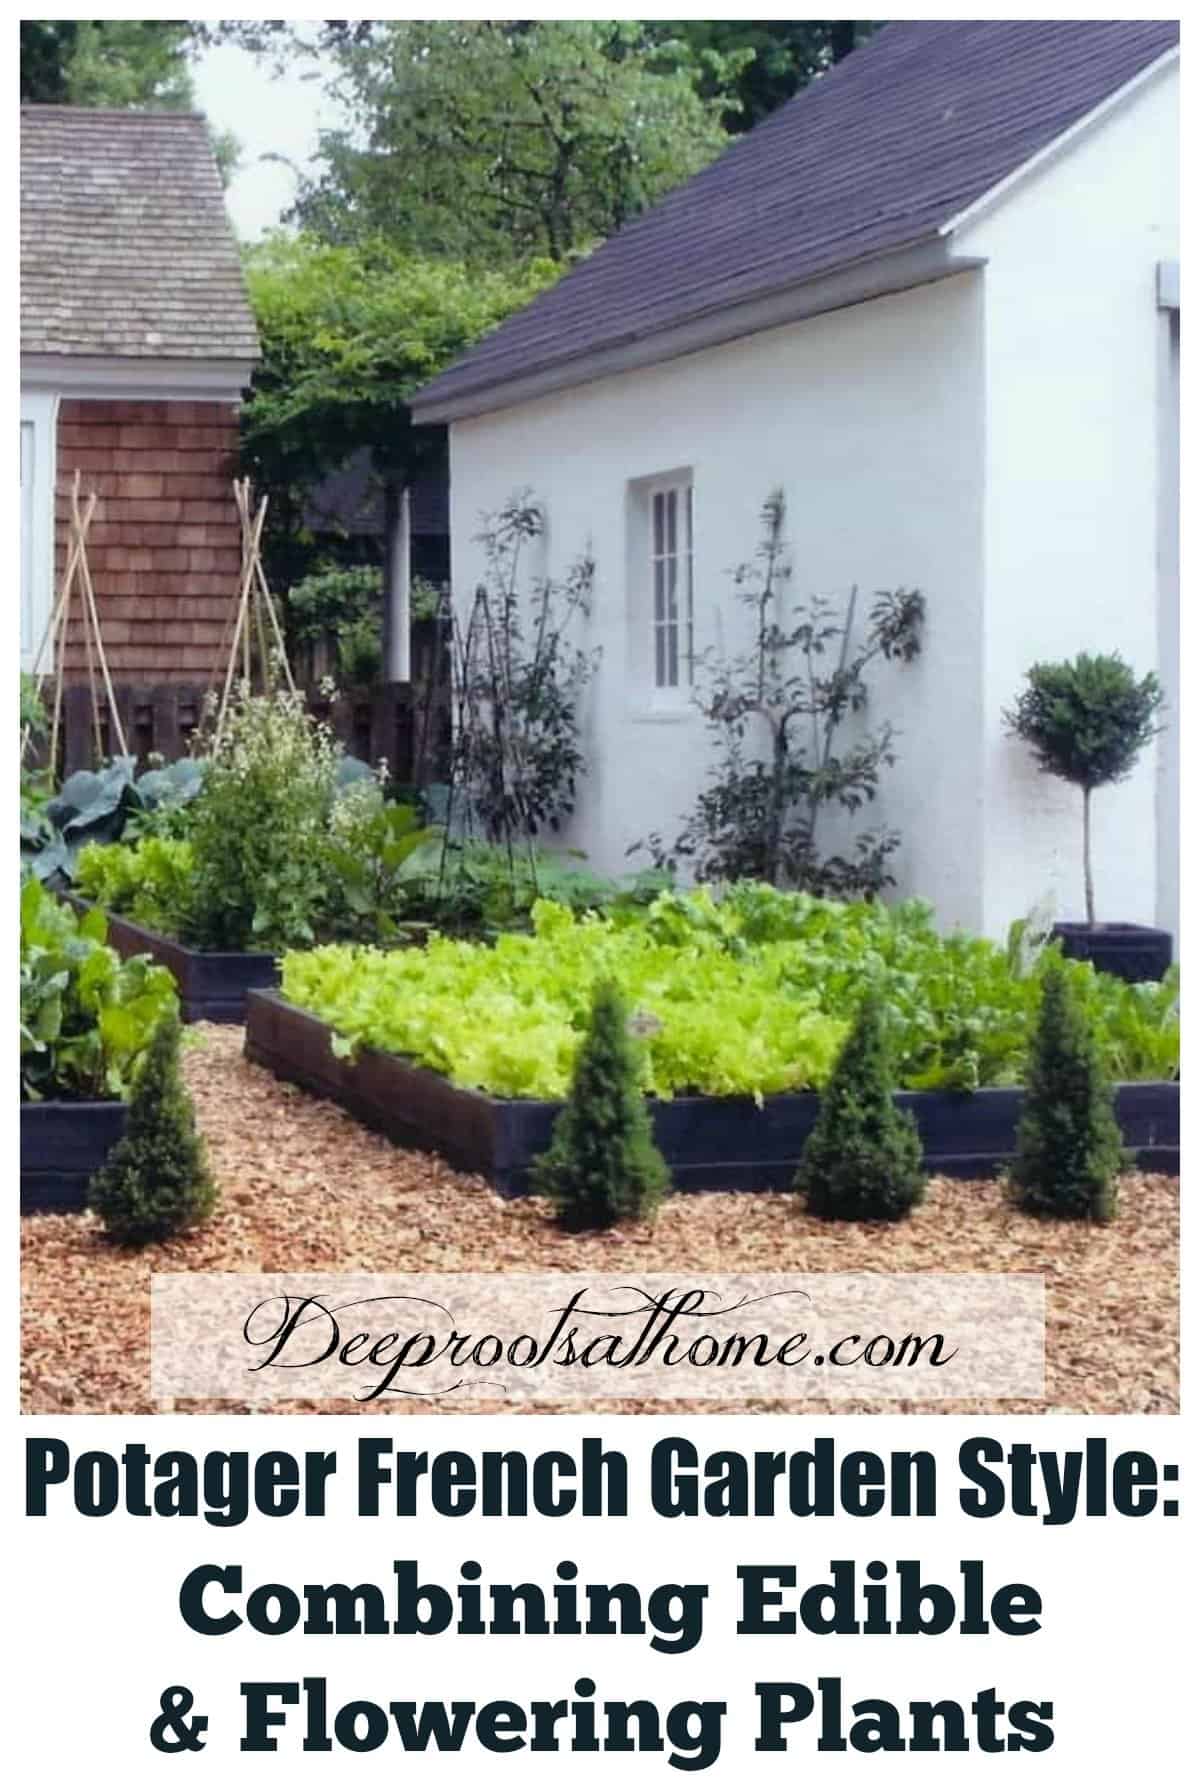 Potager French Garden Style: Combining Edible & Flowering Plants. rustic French kitchen garden